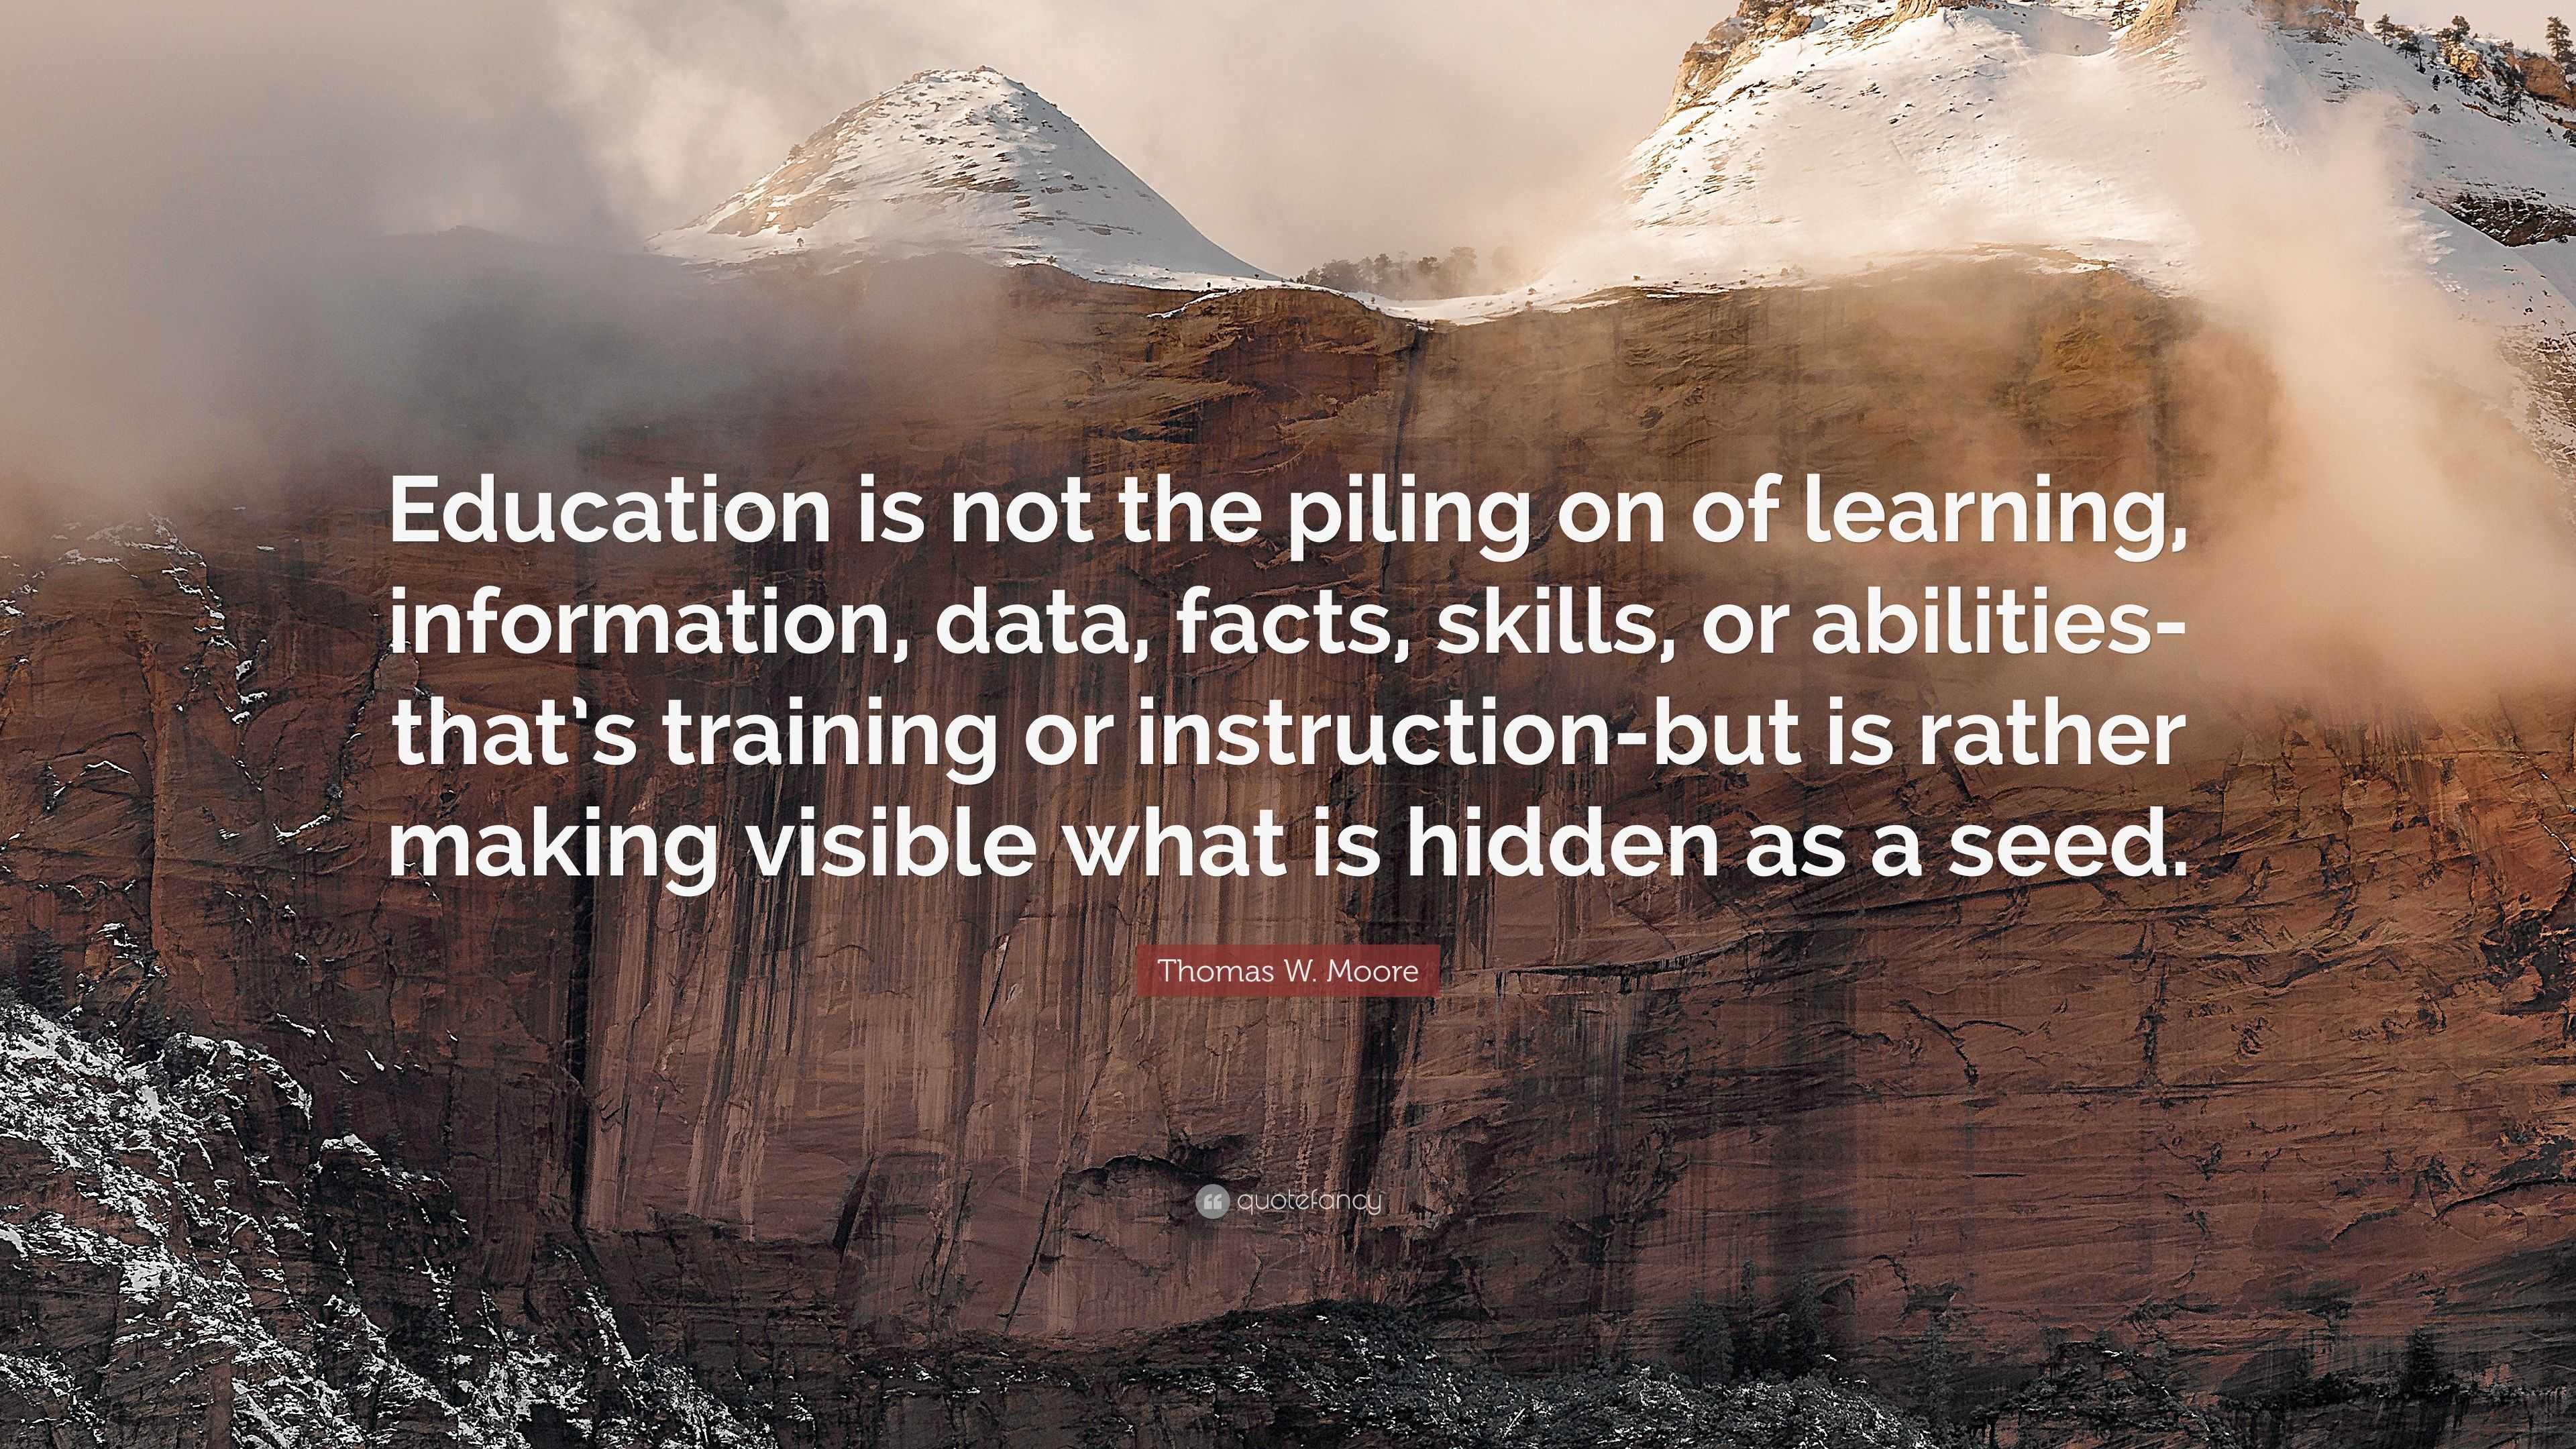 Thomas W. Moore Quote “Education is not the piling on of learning